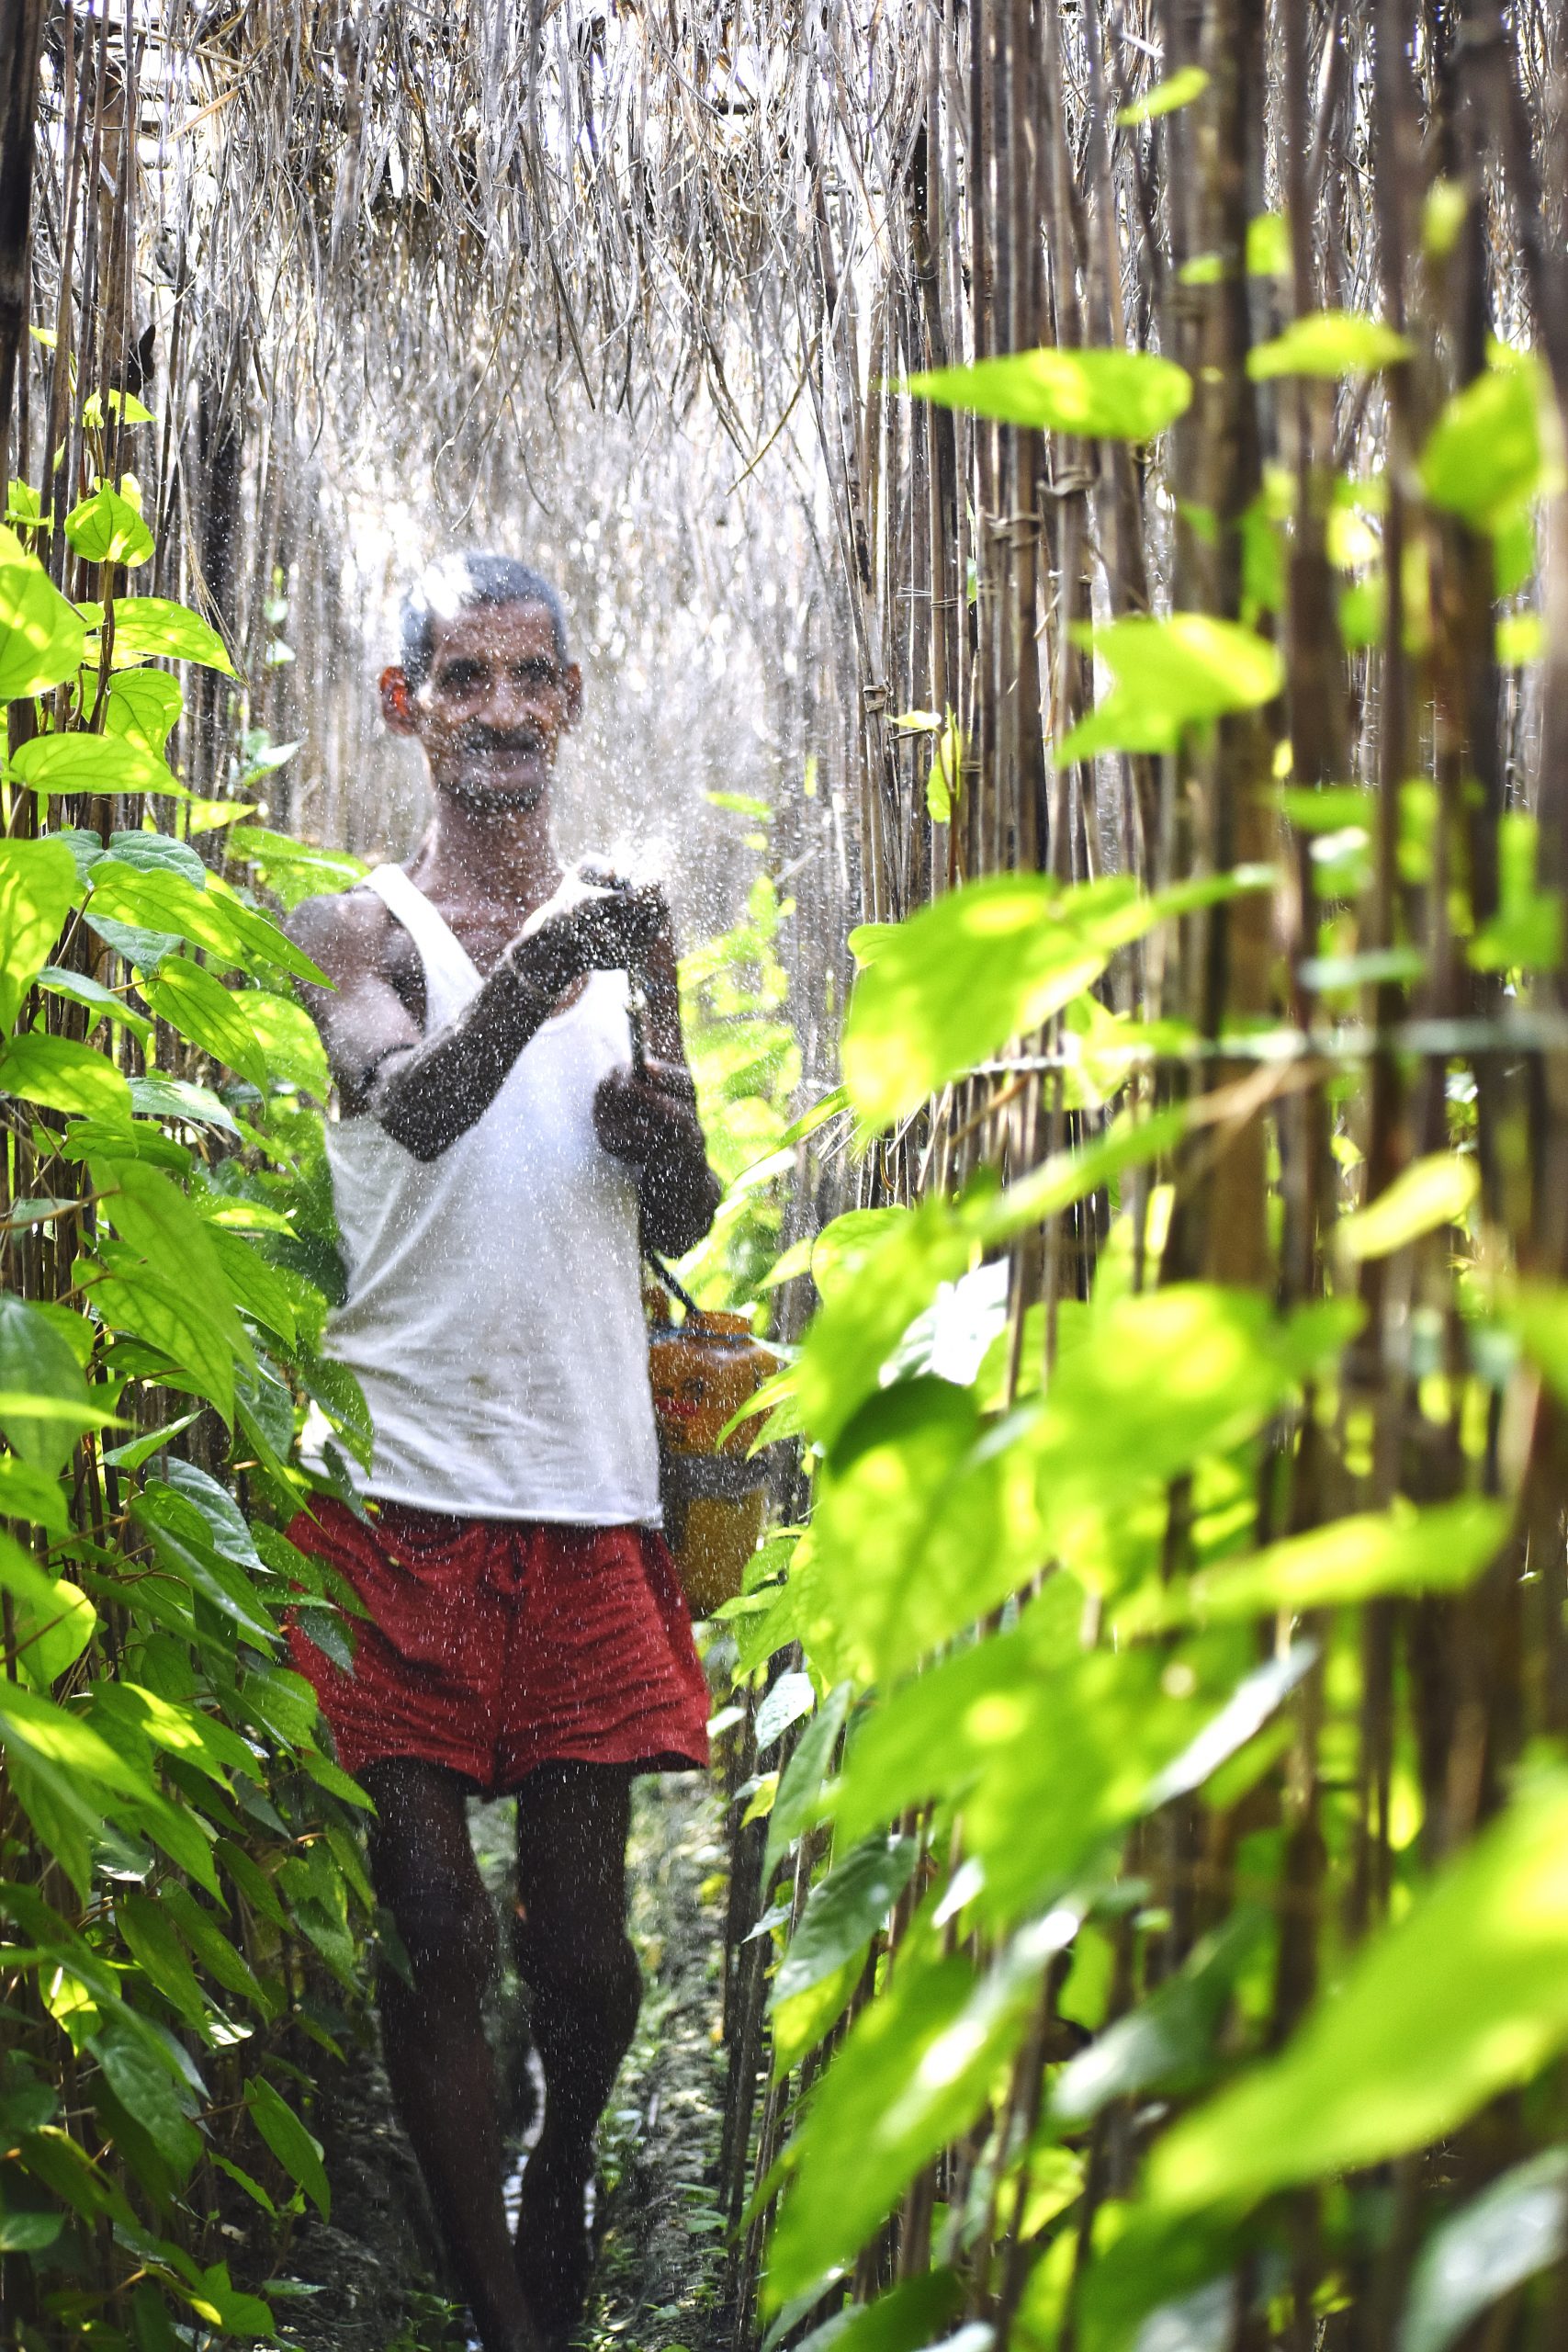 Cultivation of betel leaf